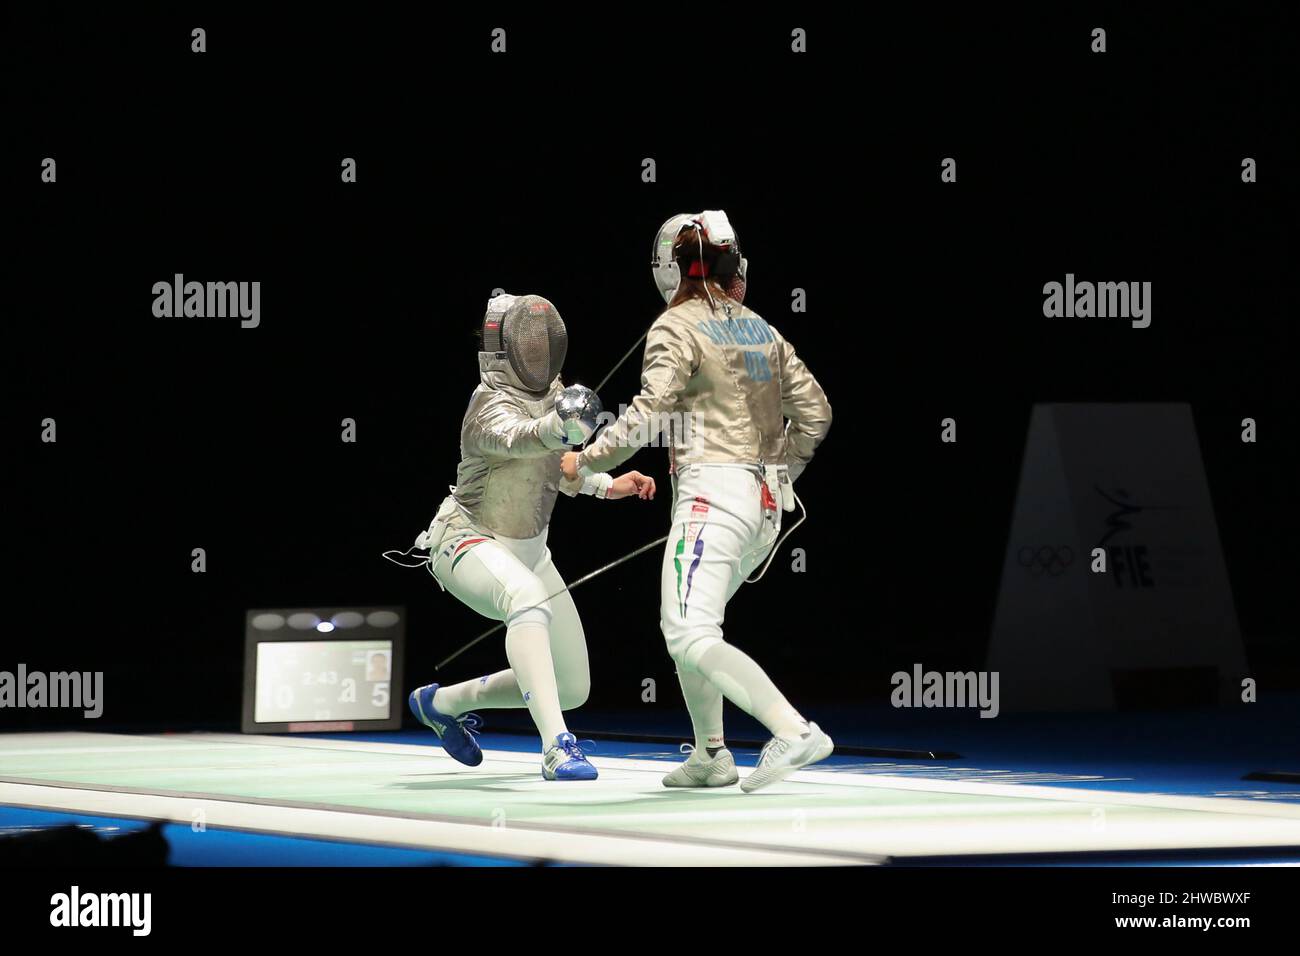 JULY 26th, 2021 - CHIBA, JAPAN: Anna Marton of Hungary (left) and  Zaynab Dayibekova of Uzbekistan (right) in action during the Women's Sabre Individu Stock Photo